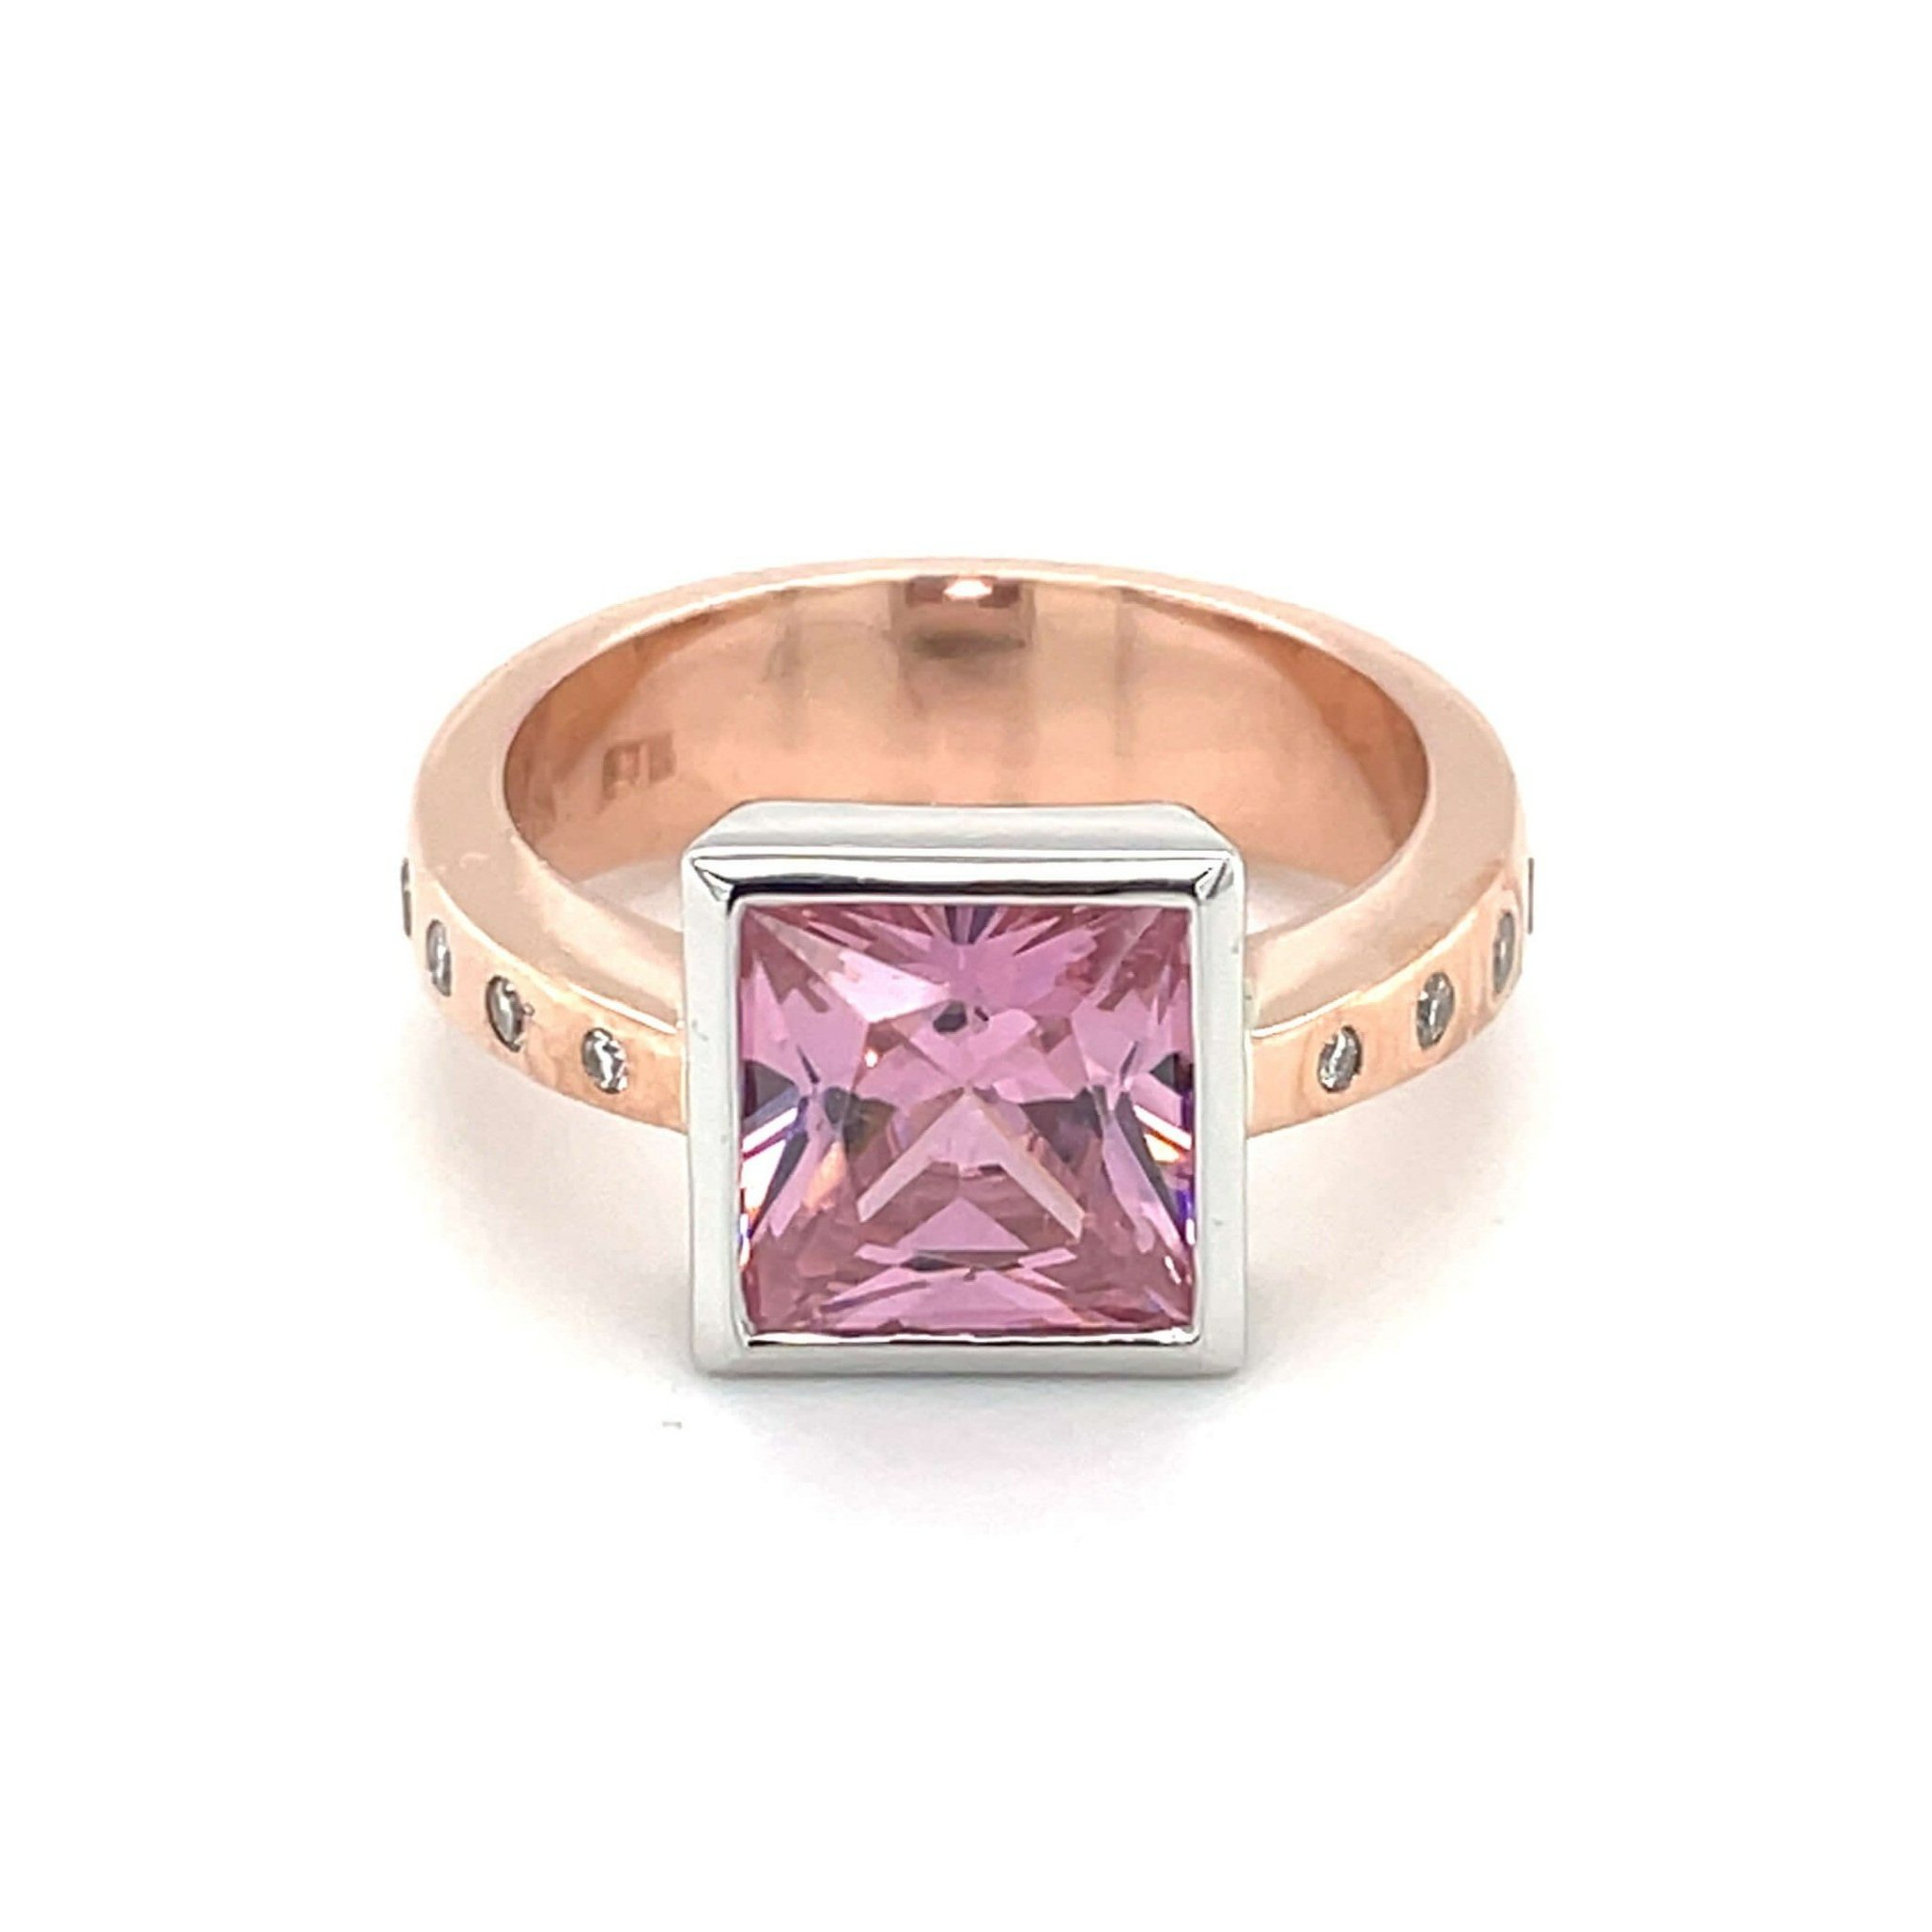 Our Most Requested Coloured Gemstones This Year - Larsen Jewellery